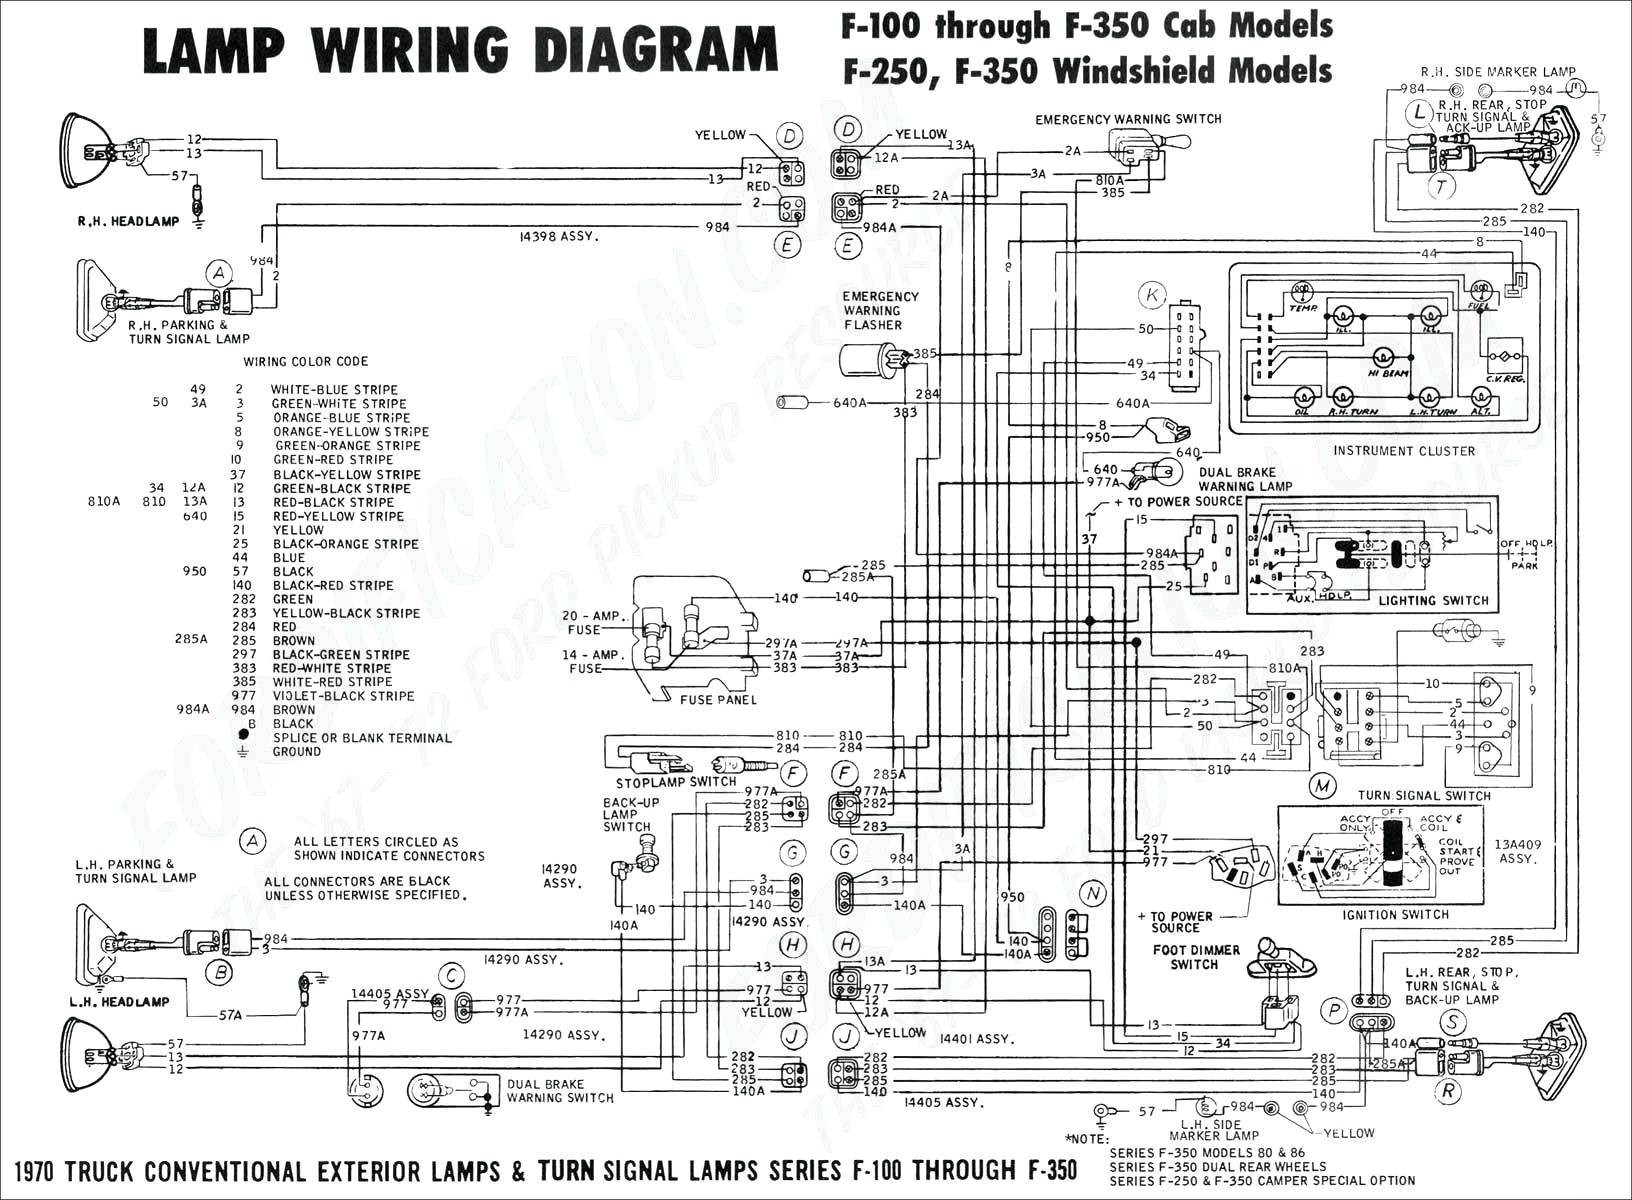 Hid Wiring Diagram with Relay Fresh Relay Base Wiring Diagram Best Hid Wiring Diagram with Relay